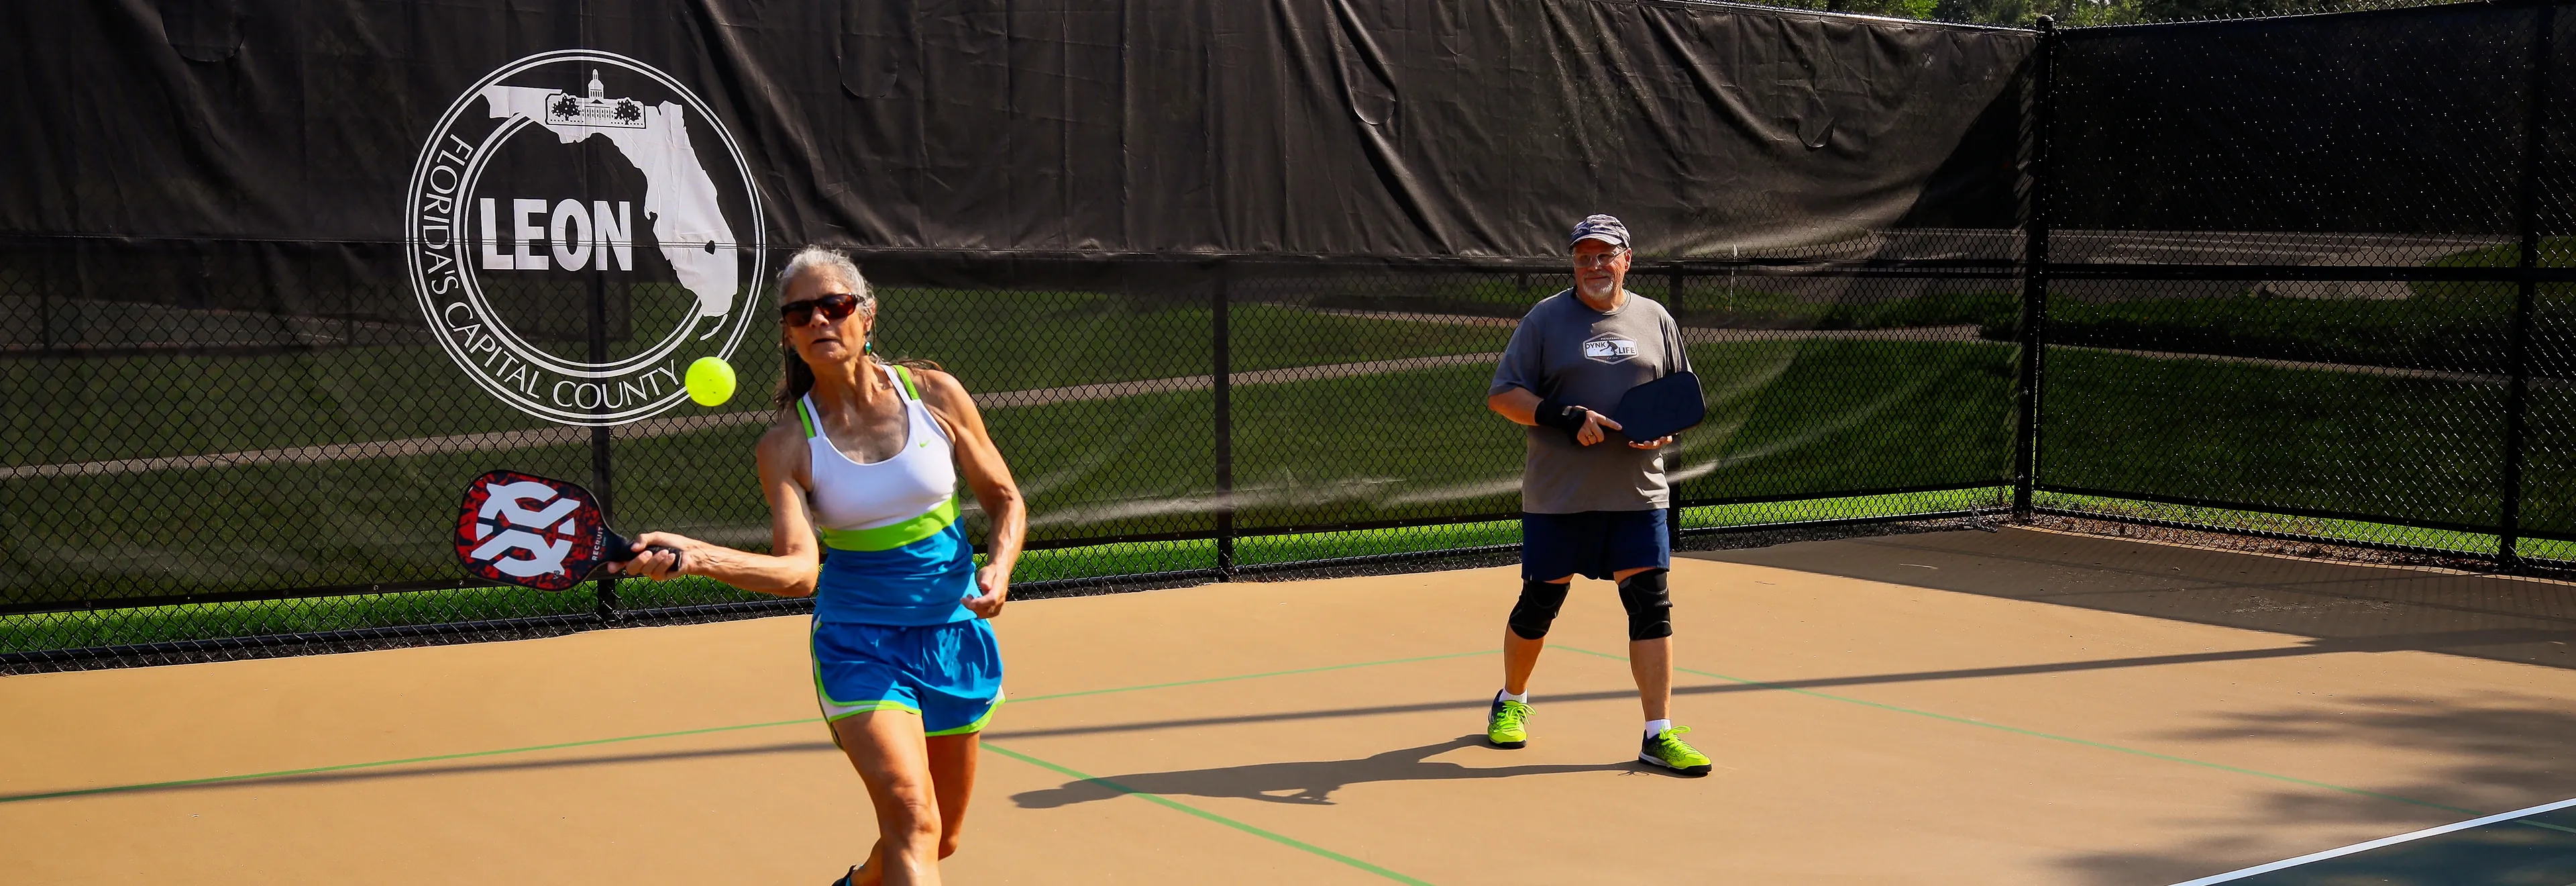 Pickleball game at Daniel B. Chaires Community Park